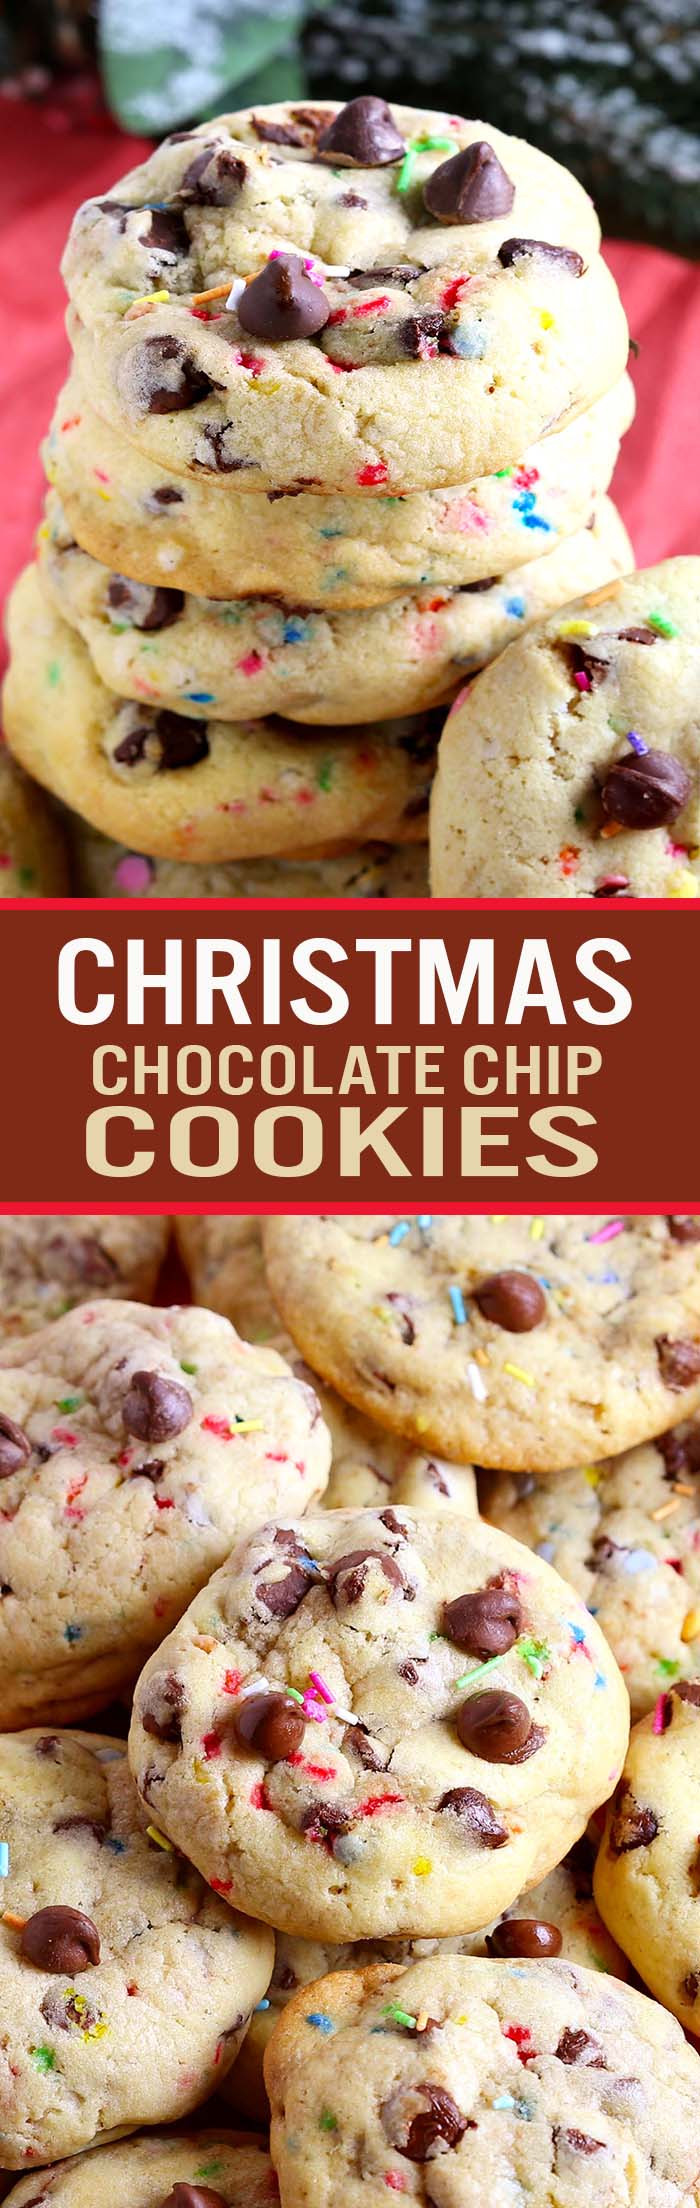 Holiday Chocolate Chip Cookies
 Christmas Chocolate Chip Cookies Cakescottage